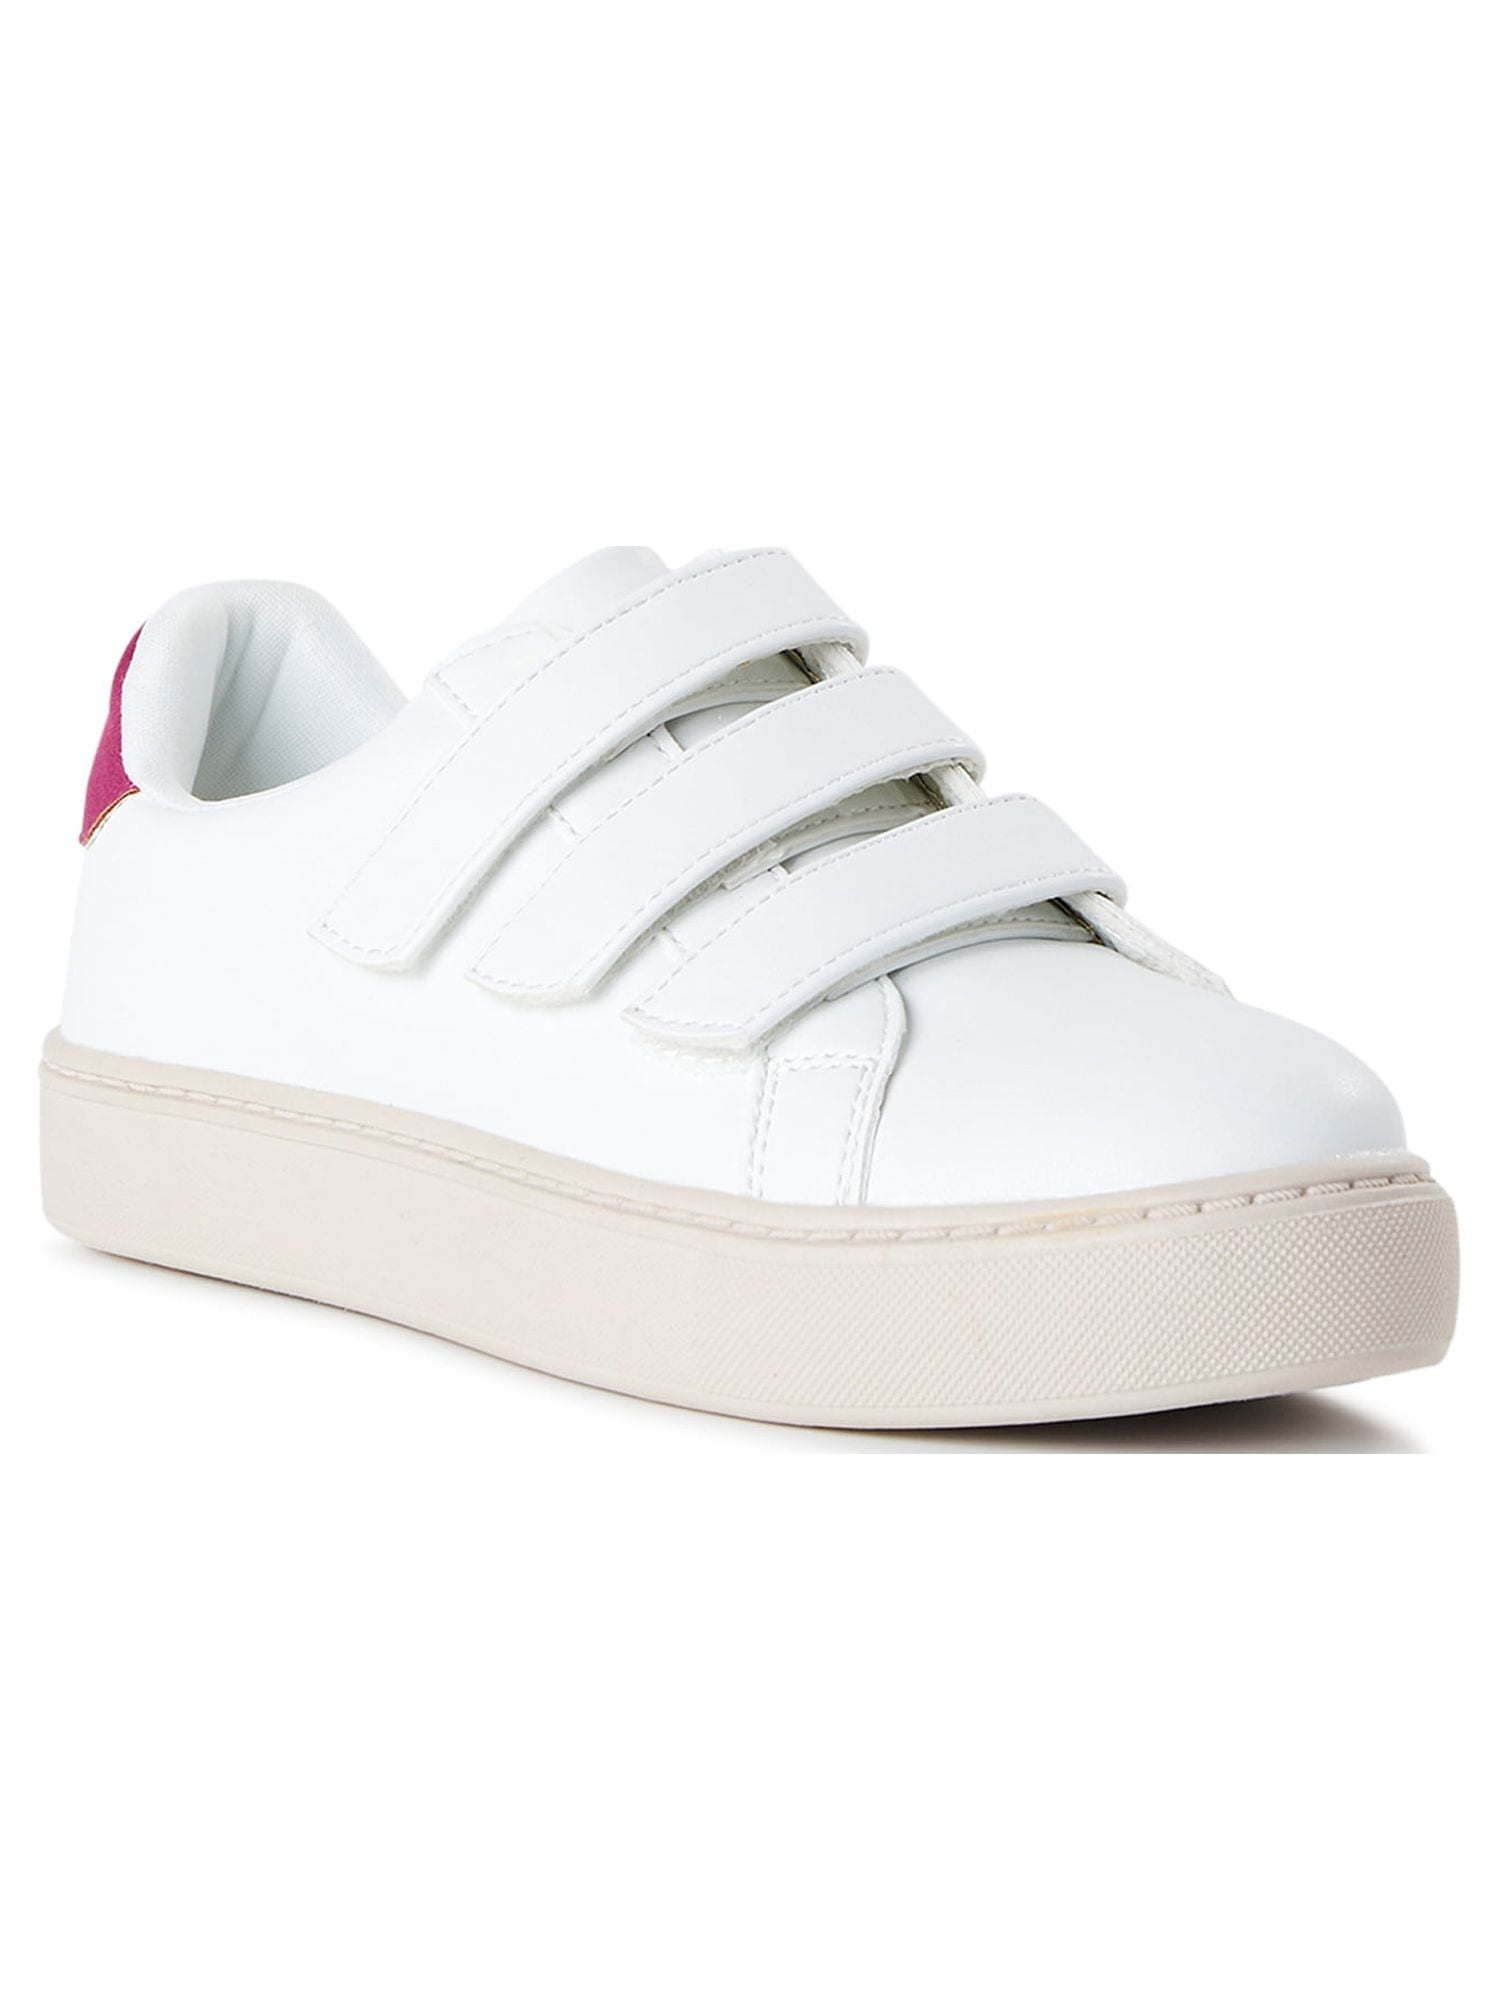 Buy Kenneth Cole Reaction Women's Jovie 2 Triple Strap Sneaker, White, 9 M  US at Amazon.in